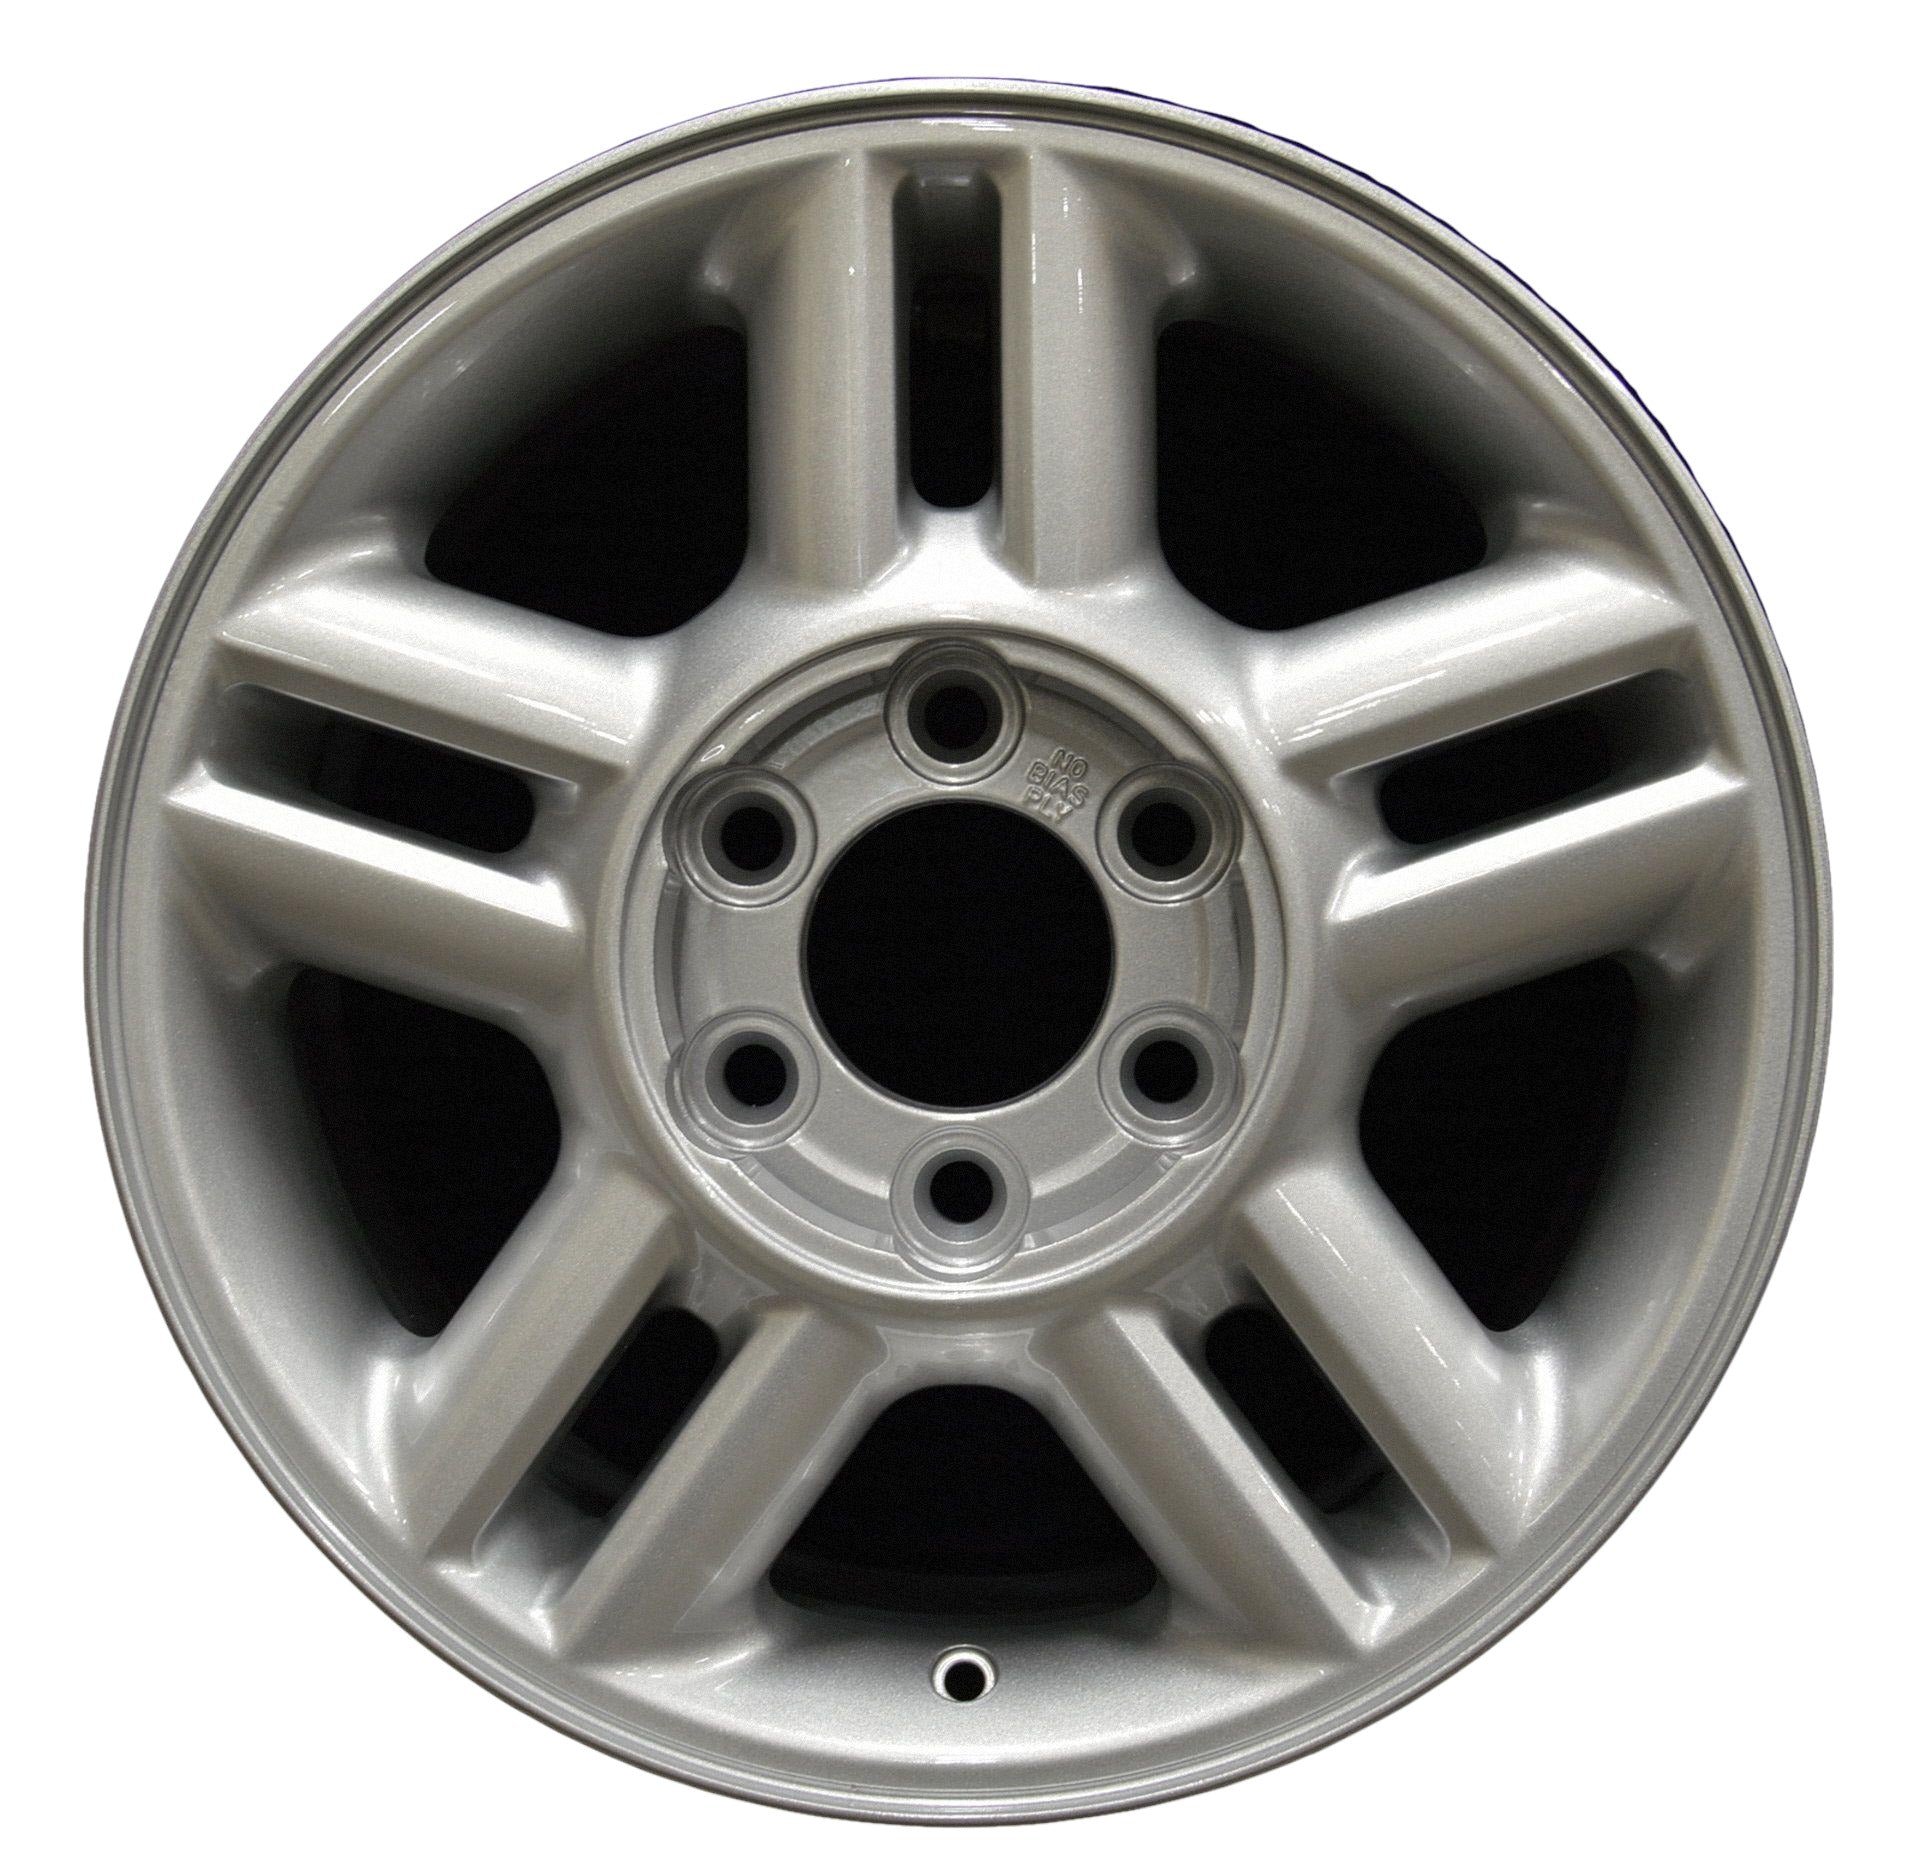 Ford Expedition  2002, 2003, 2004, 2005, 2006 Factory OEM Car Wheel Size 17x7.5 Alloy WAO.3517.PS02.FF